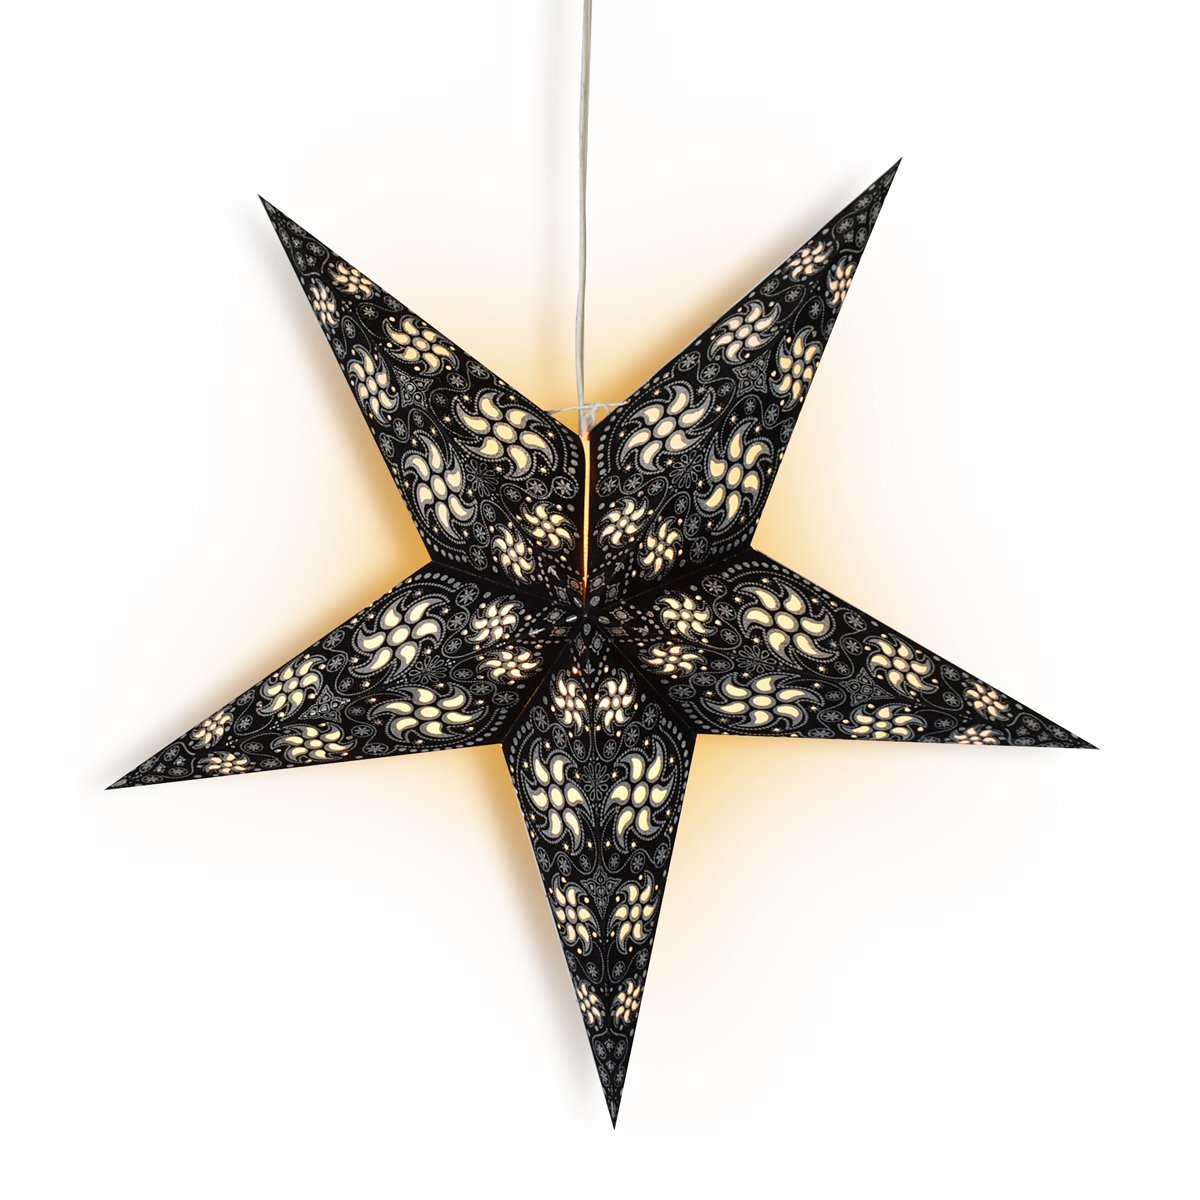 24&quot; Black / Silver Winds Glitter Paper Star Lantern, Hanging Wedding &amp; Party Decoration - PaperLanternStore.com - Paper Lanterns, Decor, Party Lights &amp; More